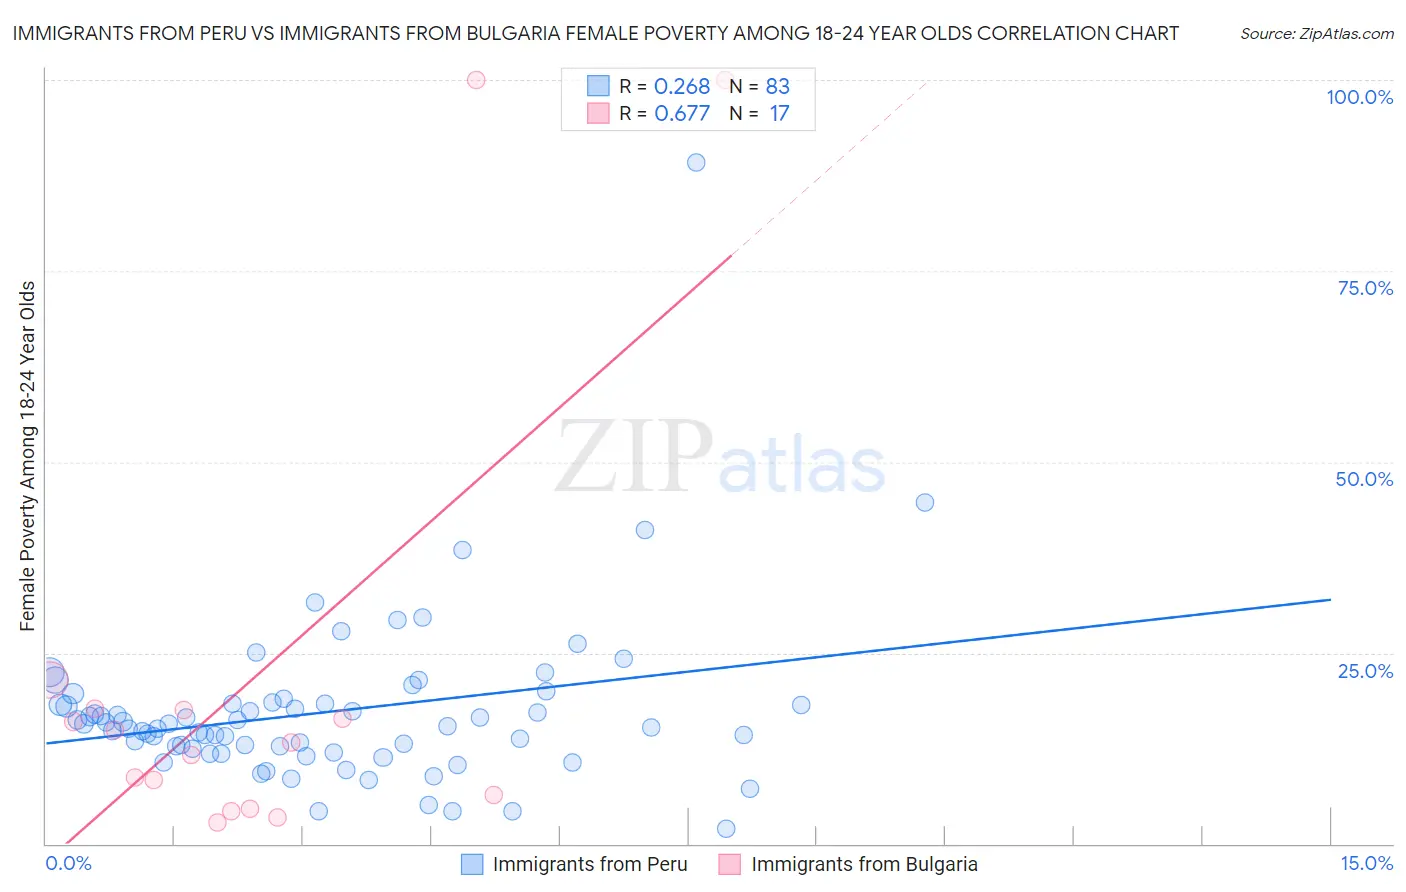 Immigrants from Peru vs Immigrants from Bulgaria Female Poverty Among 18-24 Year Olds